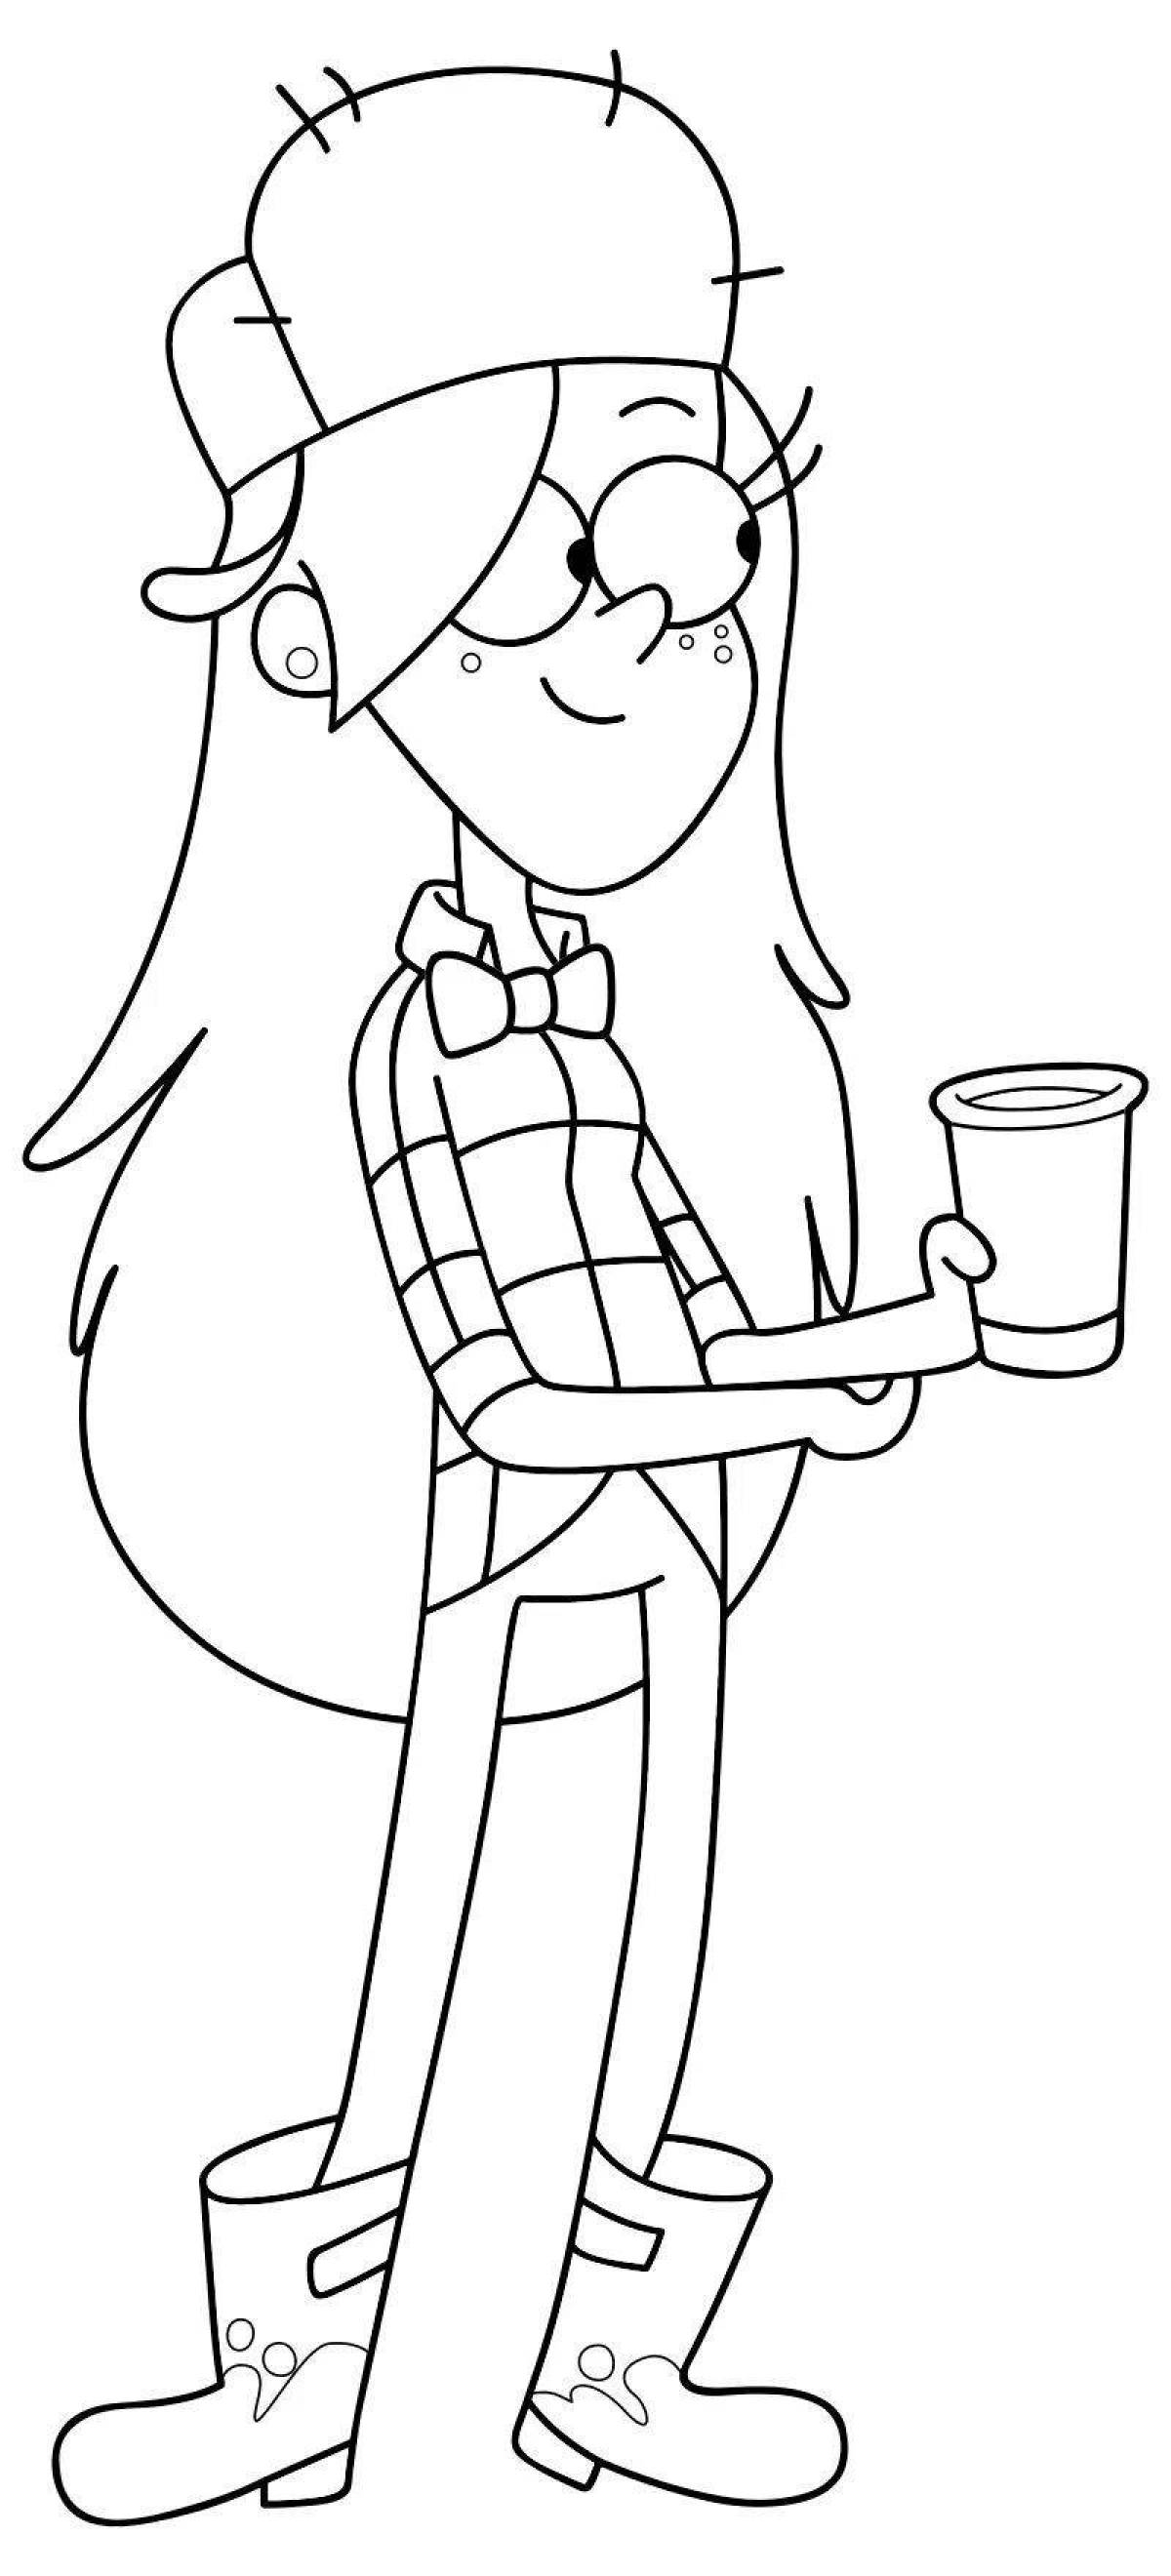 Wendy's vibrant coloring page